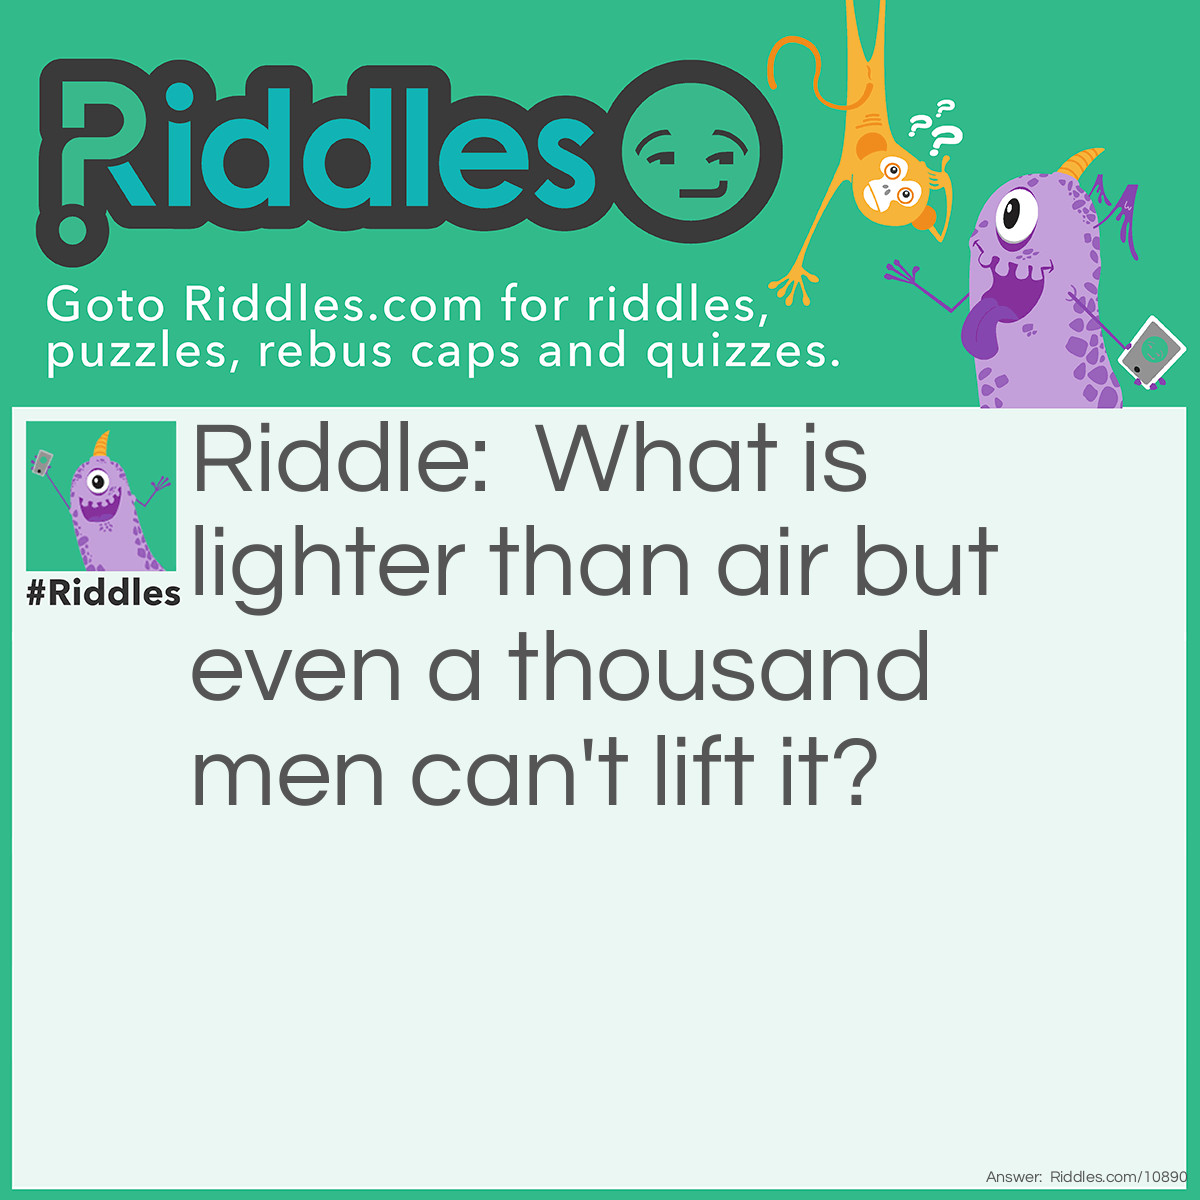 Riddle: What is lighter than air but even a thousand men can't lift it? Answer: A Bubble